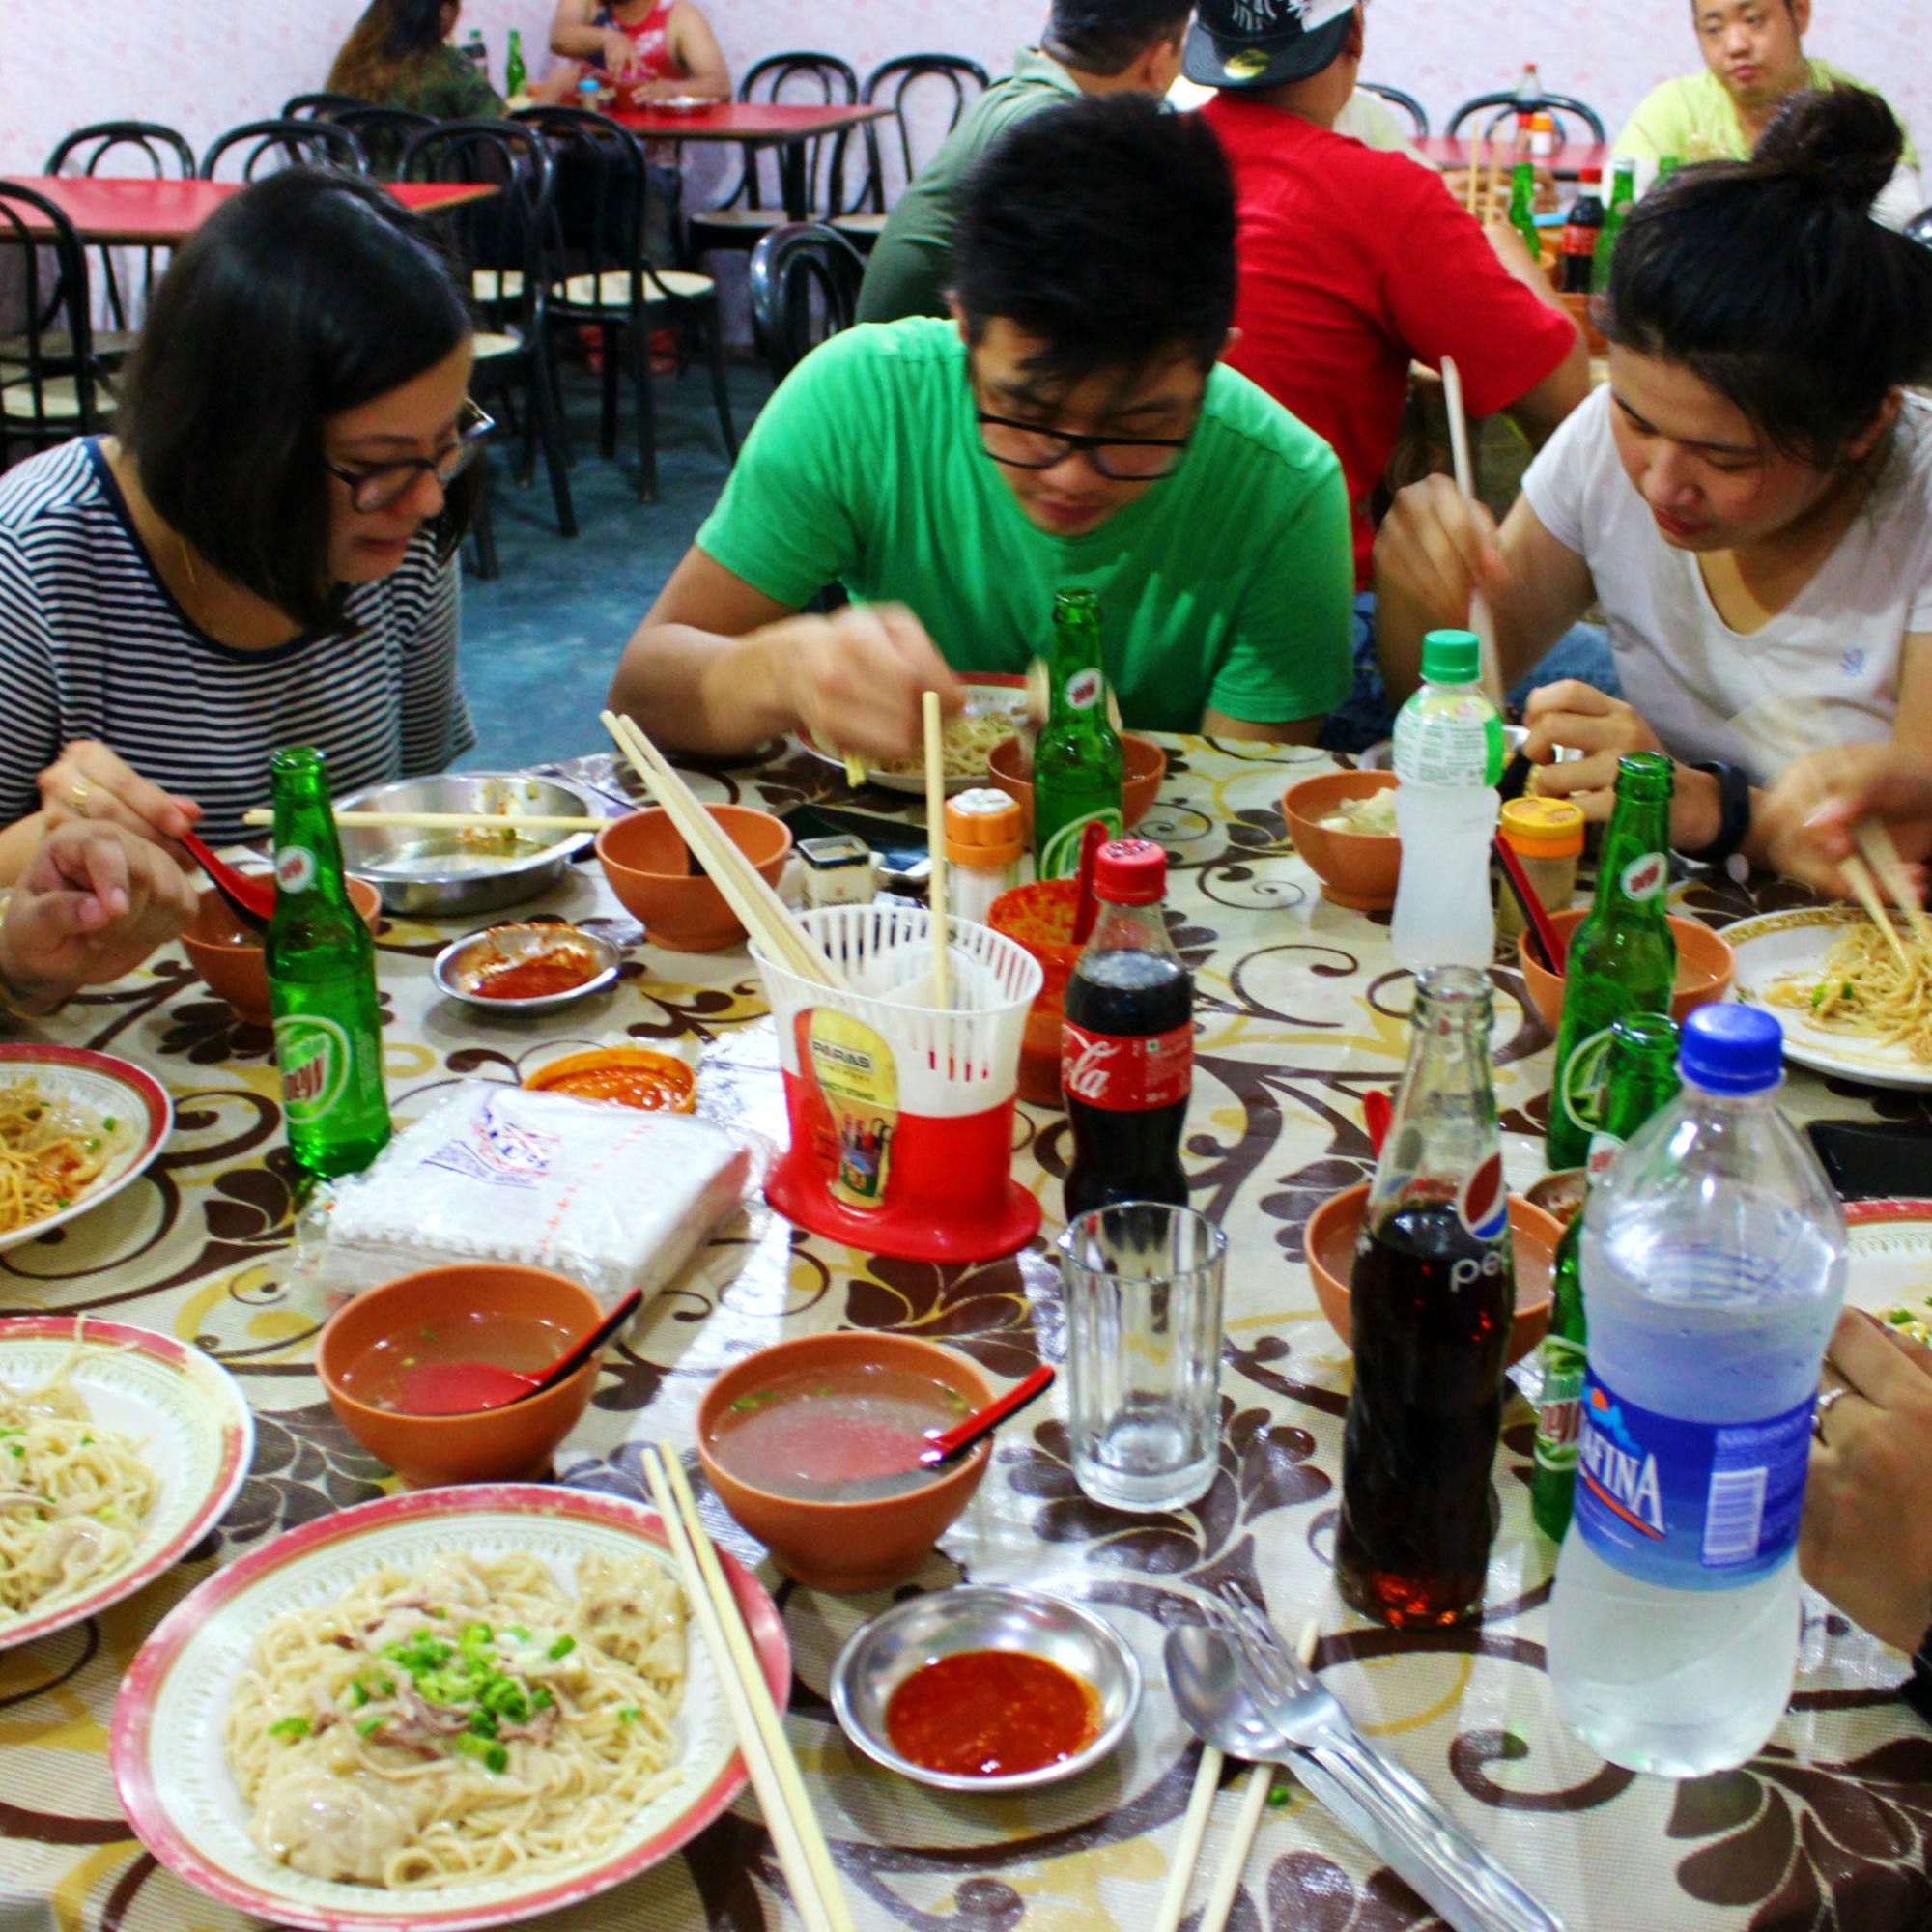 Meal,Lunch,Food,Dish,Eating,Cuisine,Dinner,Supper,Drink,Chinese food